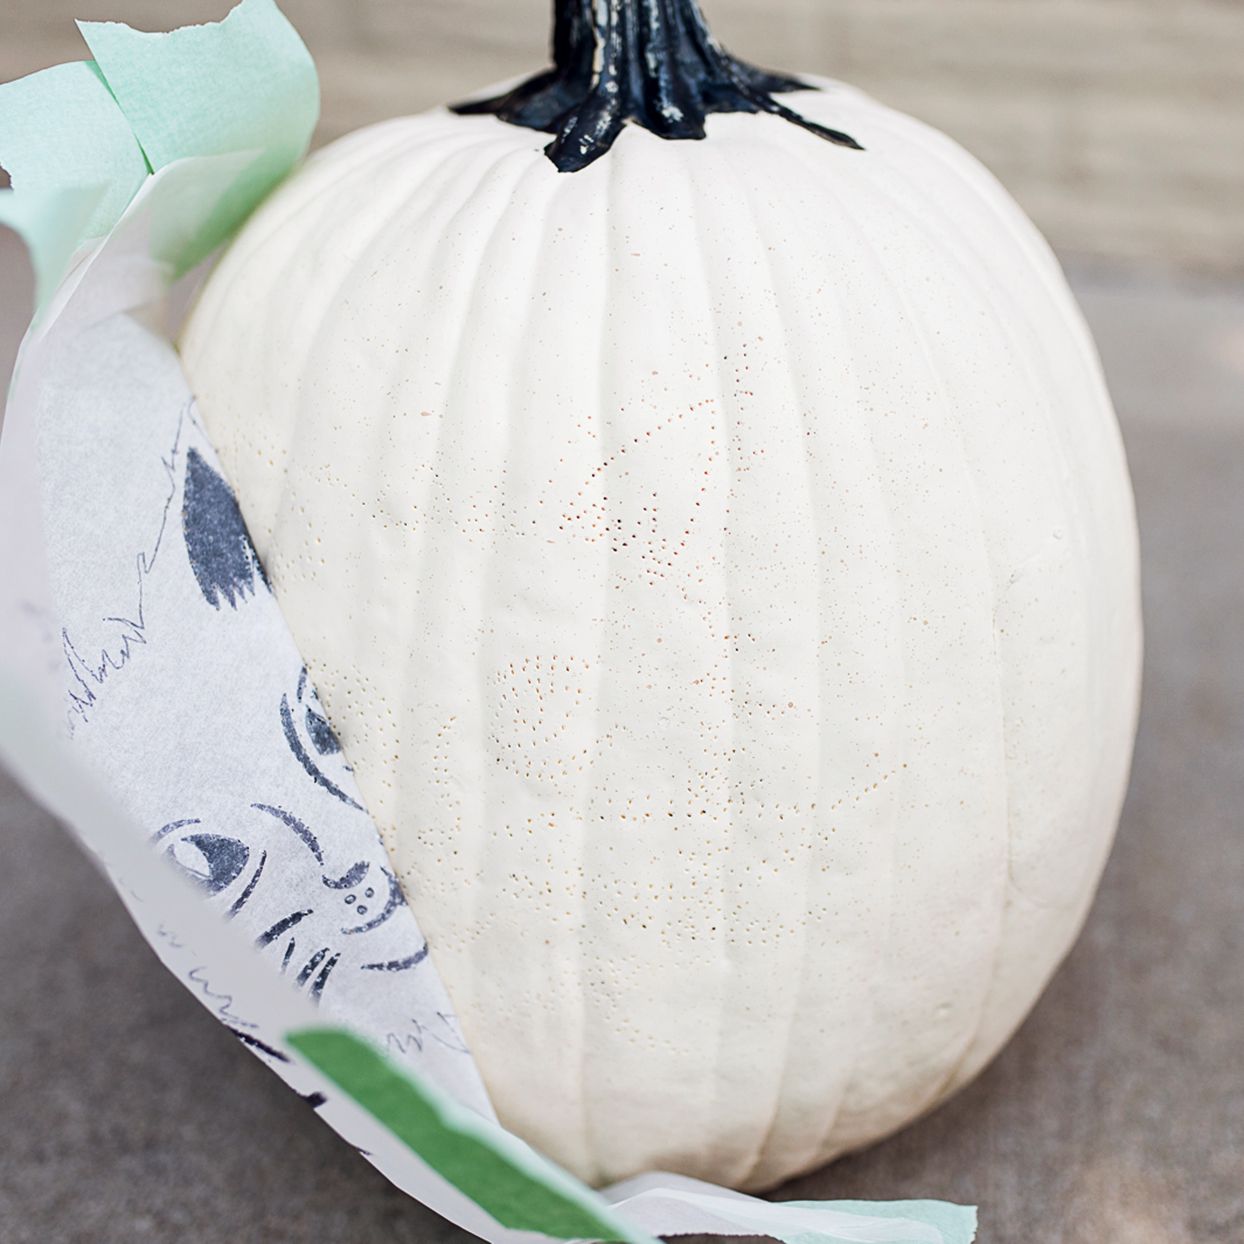 peeling stencil off a white pumpkin with pin points guiding cat pumpkin carving